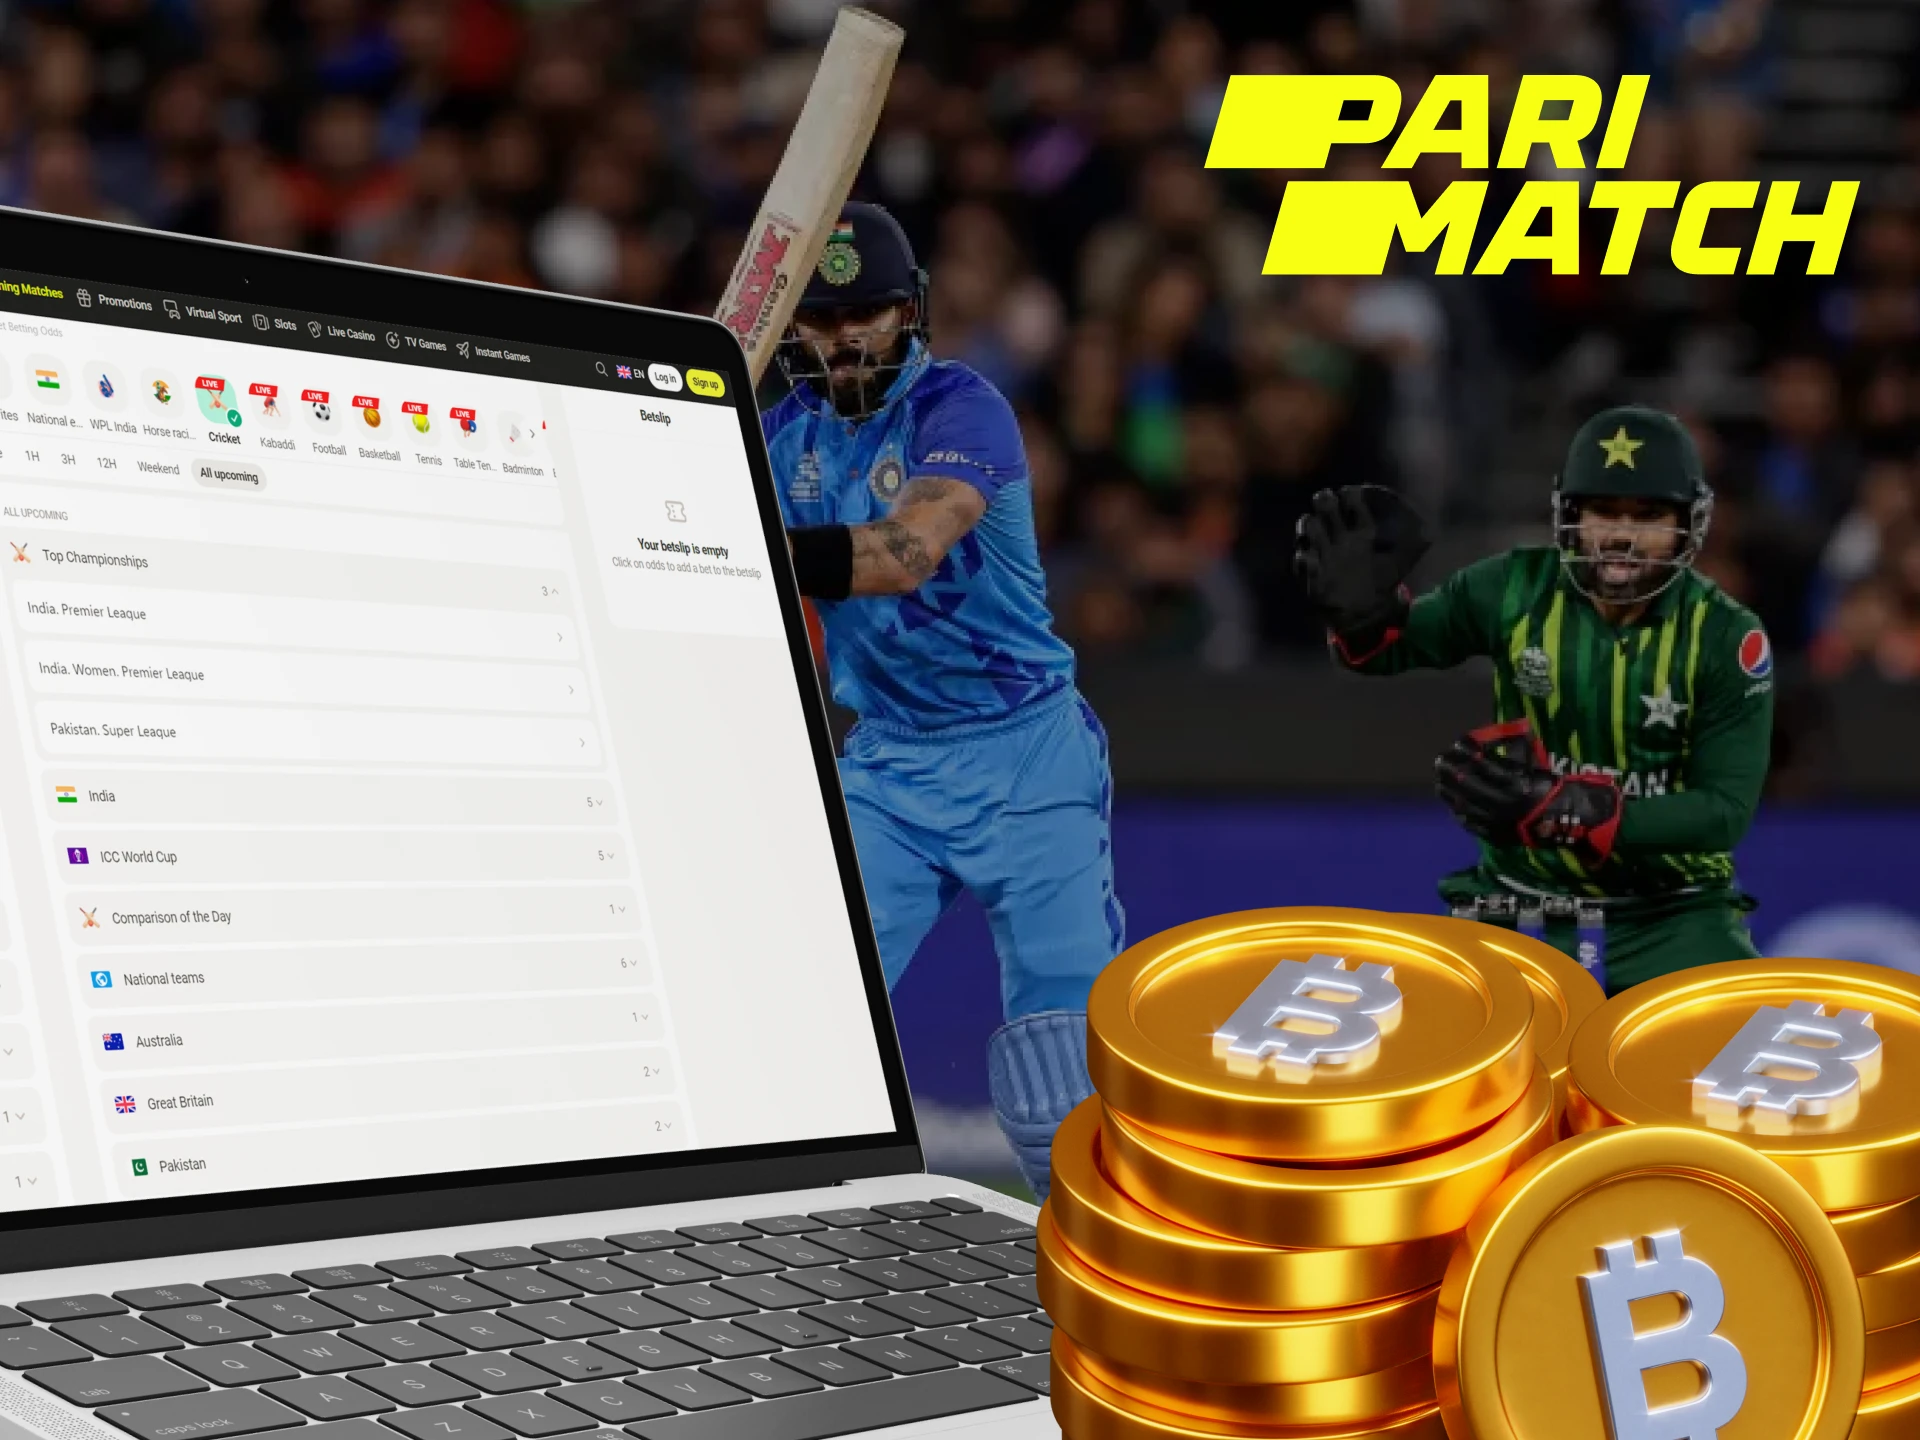 Bet on cricket with cryptocurrency at Parimatch.